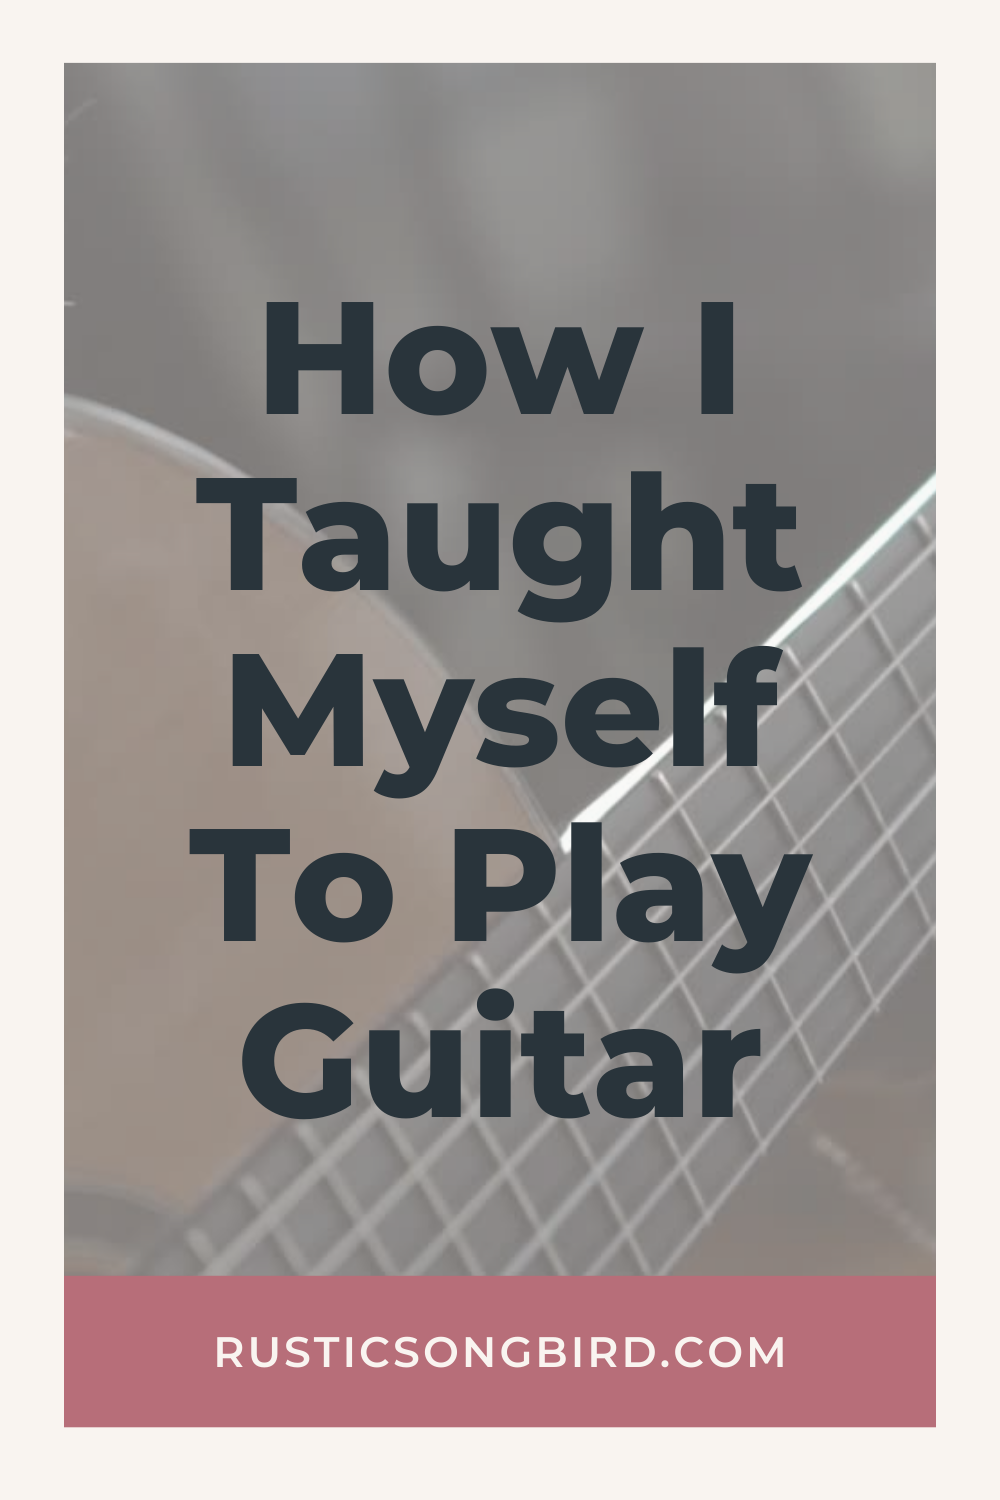 picture of acoustic guitar with title text of the blog post called "how i taught myself to play guitar"